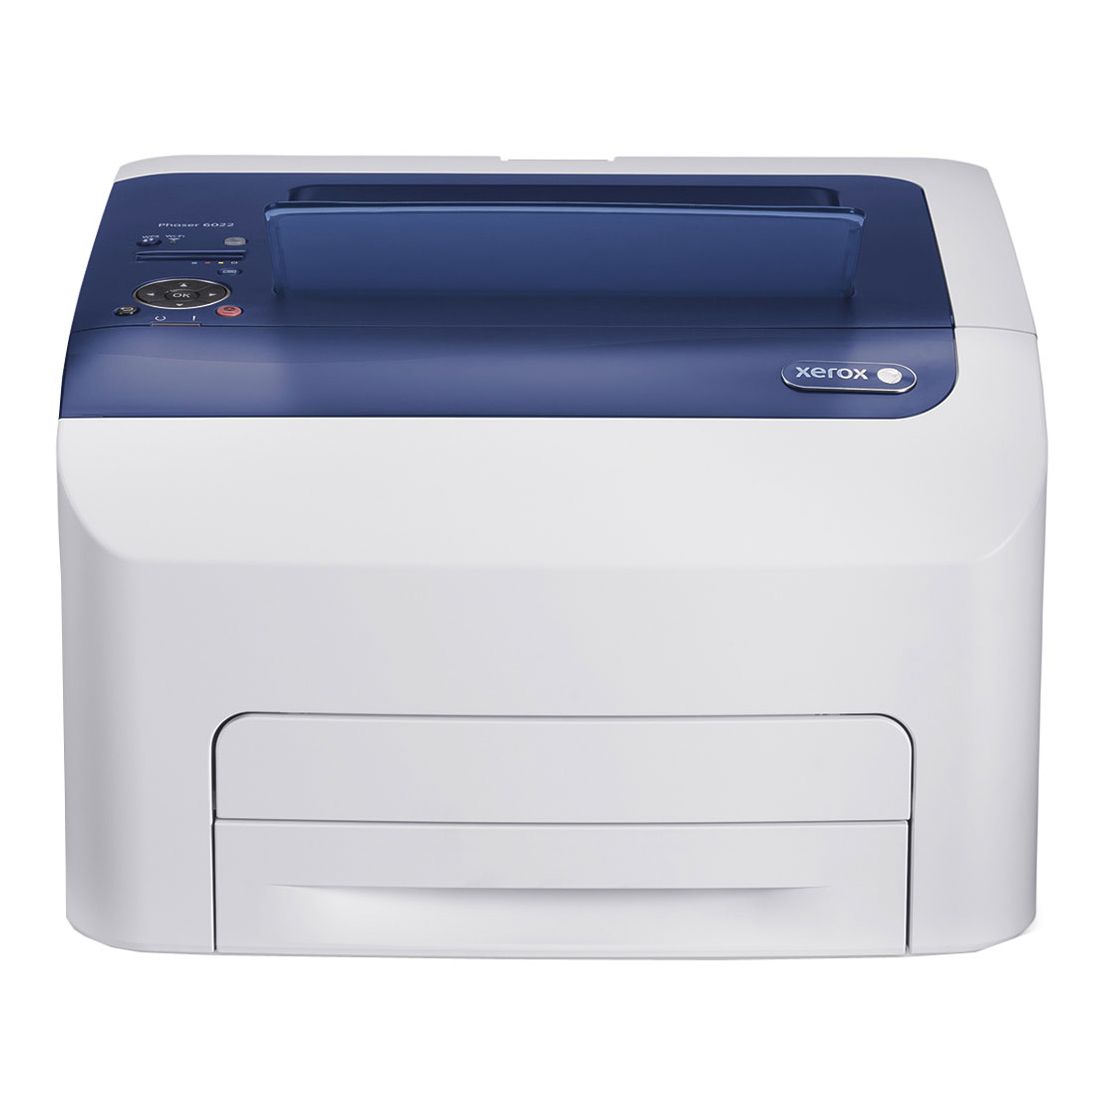  Imprimanta laser color Xerox Phaser 6022, Wireless, A4 